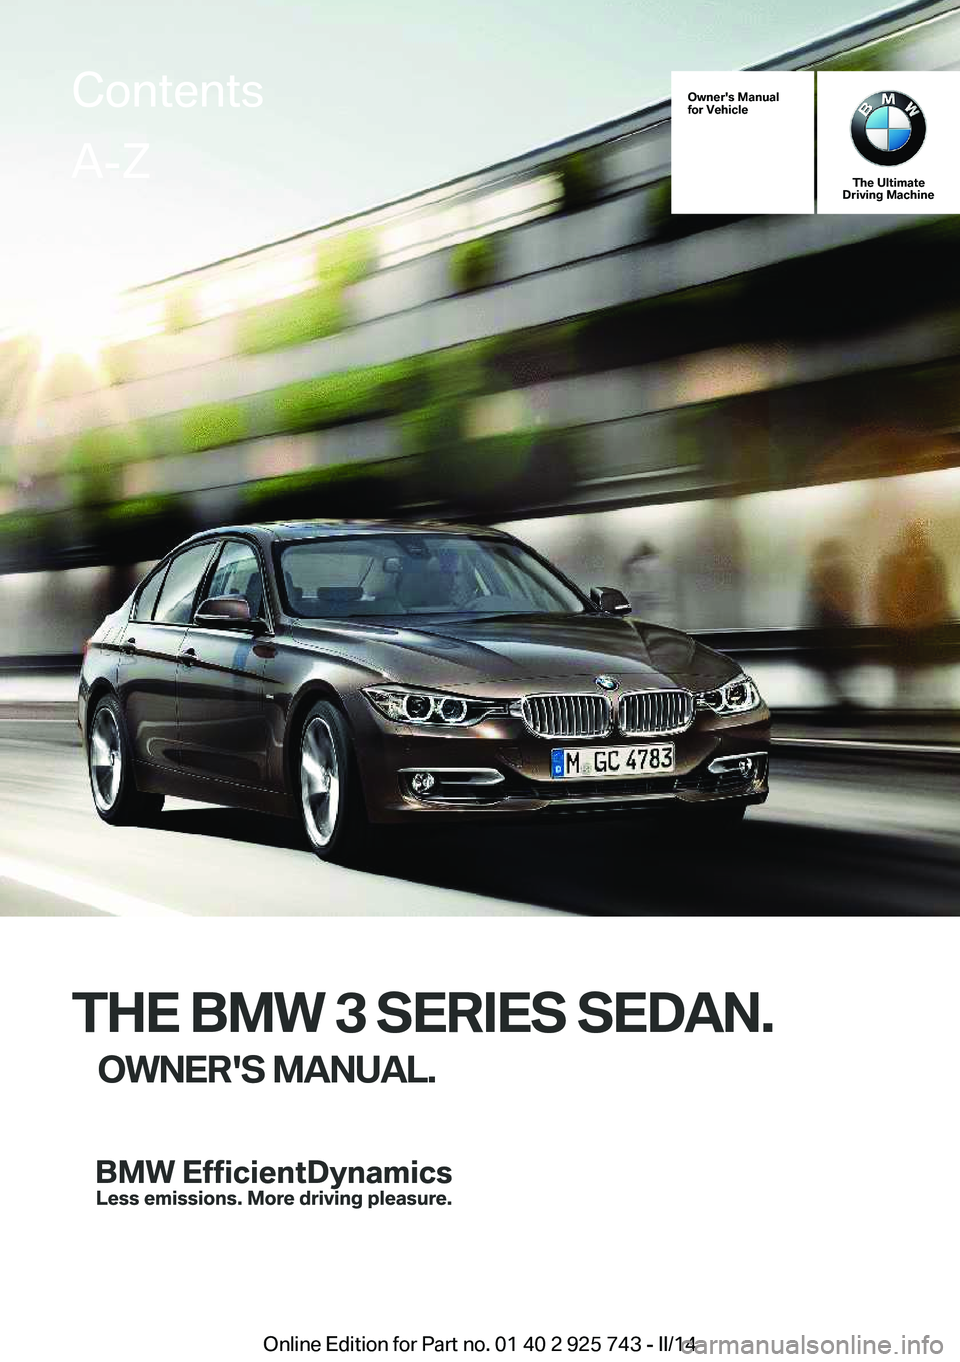 BMW 328D XDRIVE SEDAN 2014  Owners Manual Owner's Manual
for Vehicle
The Ultimate
Driving Machine
THE BMW 3 SERIES SEDAN.
OWNER'S MANUAL.
ContentsA-Z
Online Edition for Part no. 01 40 2 925 743 - II/14   